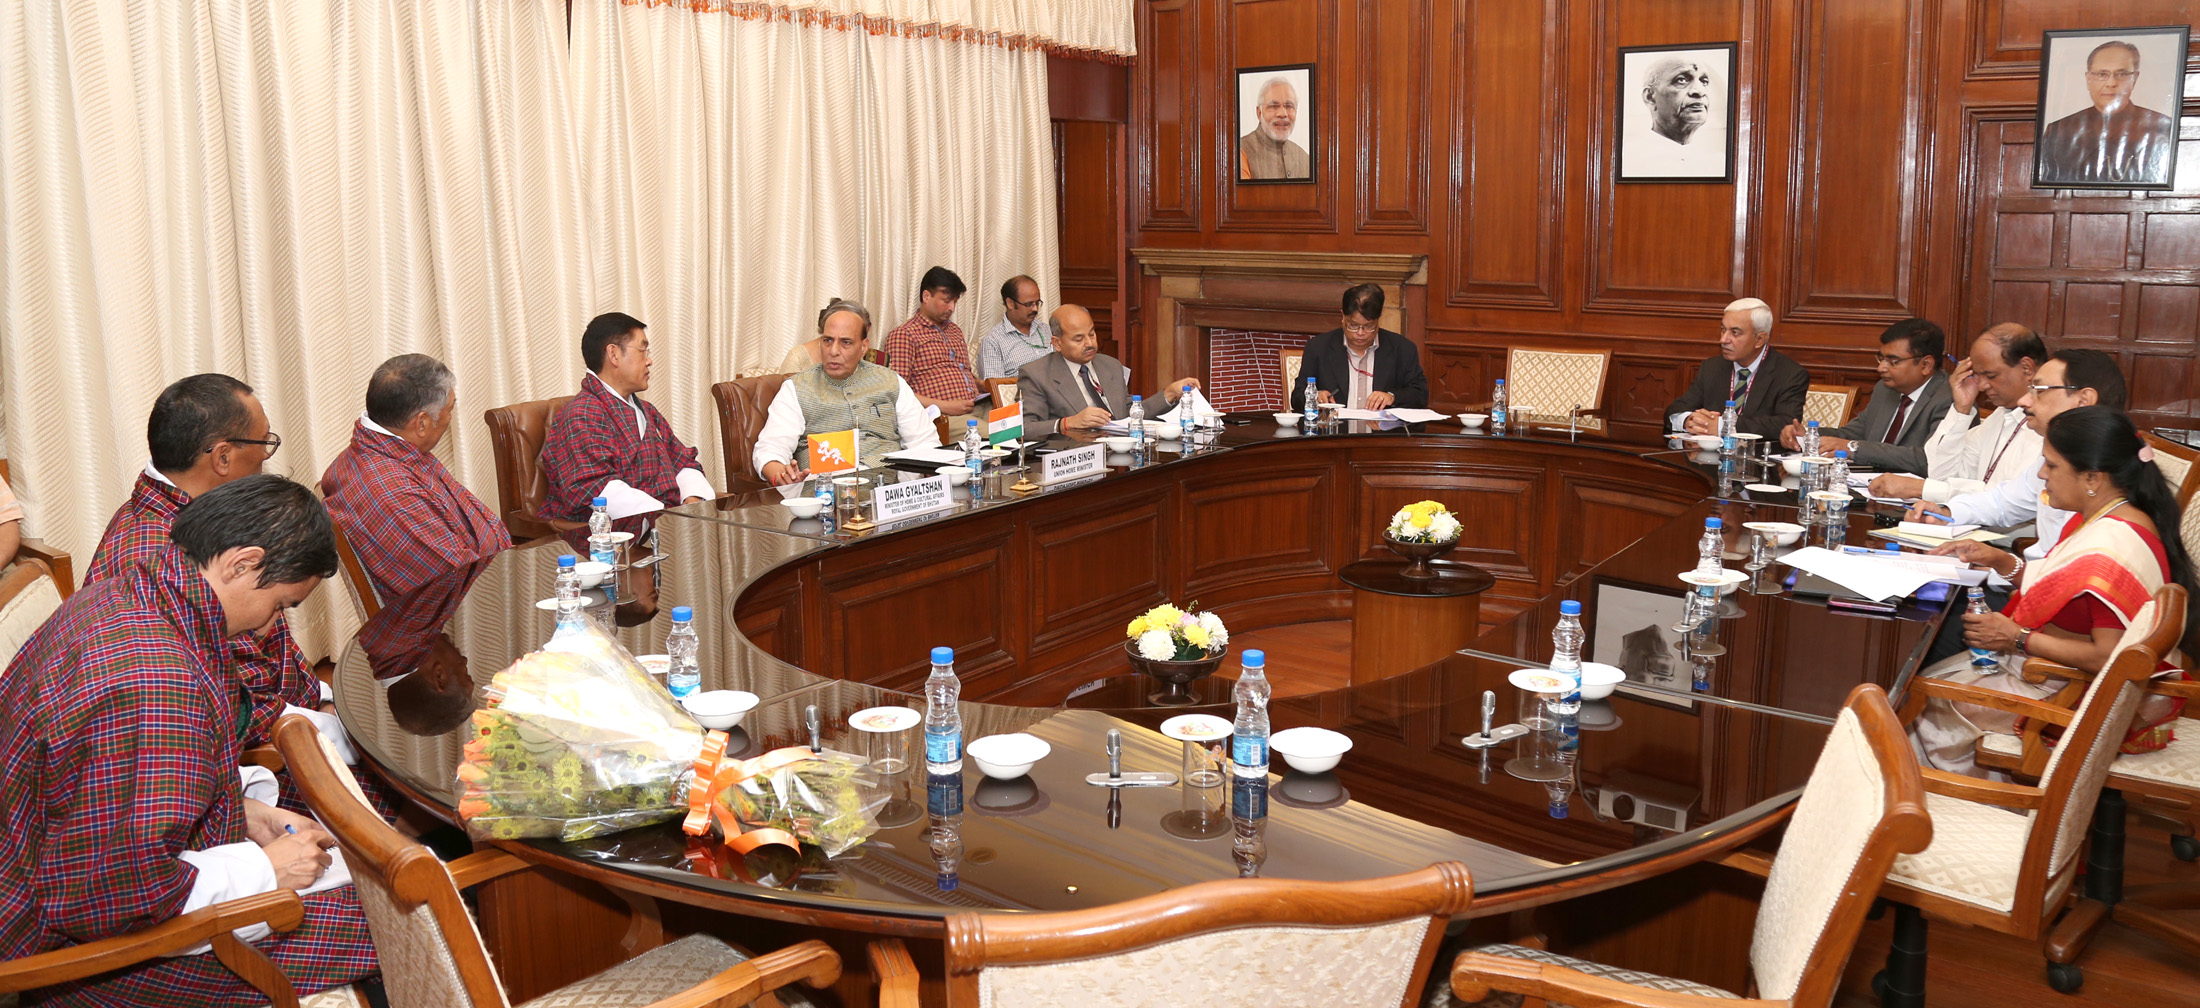 A Bhutanese delegation led by the Minister of Home & Cultural Affairs, Bhutan, Mr. Dawa Gyaltshen meeting the Union Home Minister, Shri Rajnath Singh, in New Delhi on November 04, 2016.  The Secretary (Border Management), Ministry of Home Affairs, Shri Susheel Kumar and other senior officers are also seen.